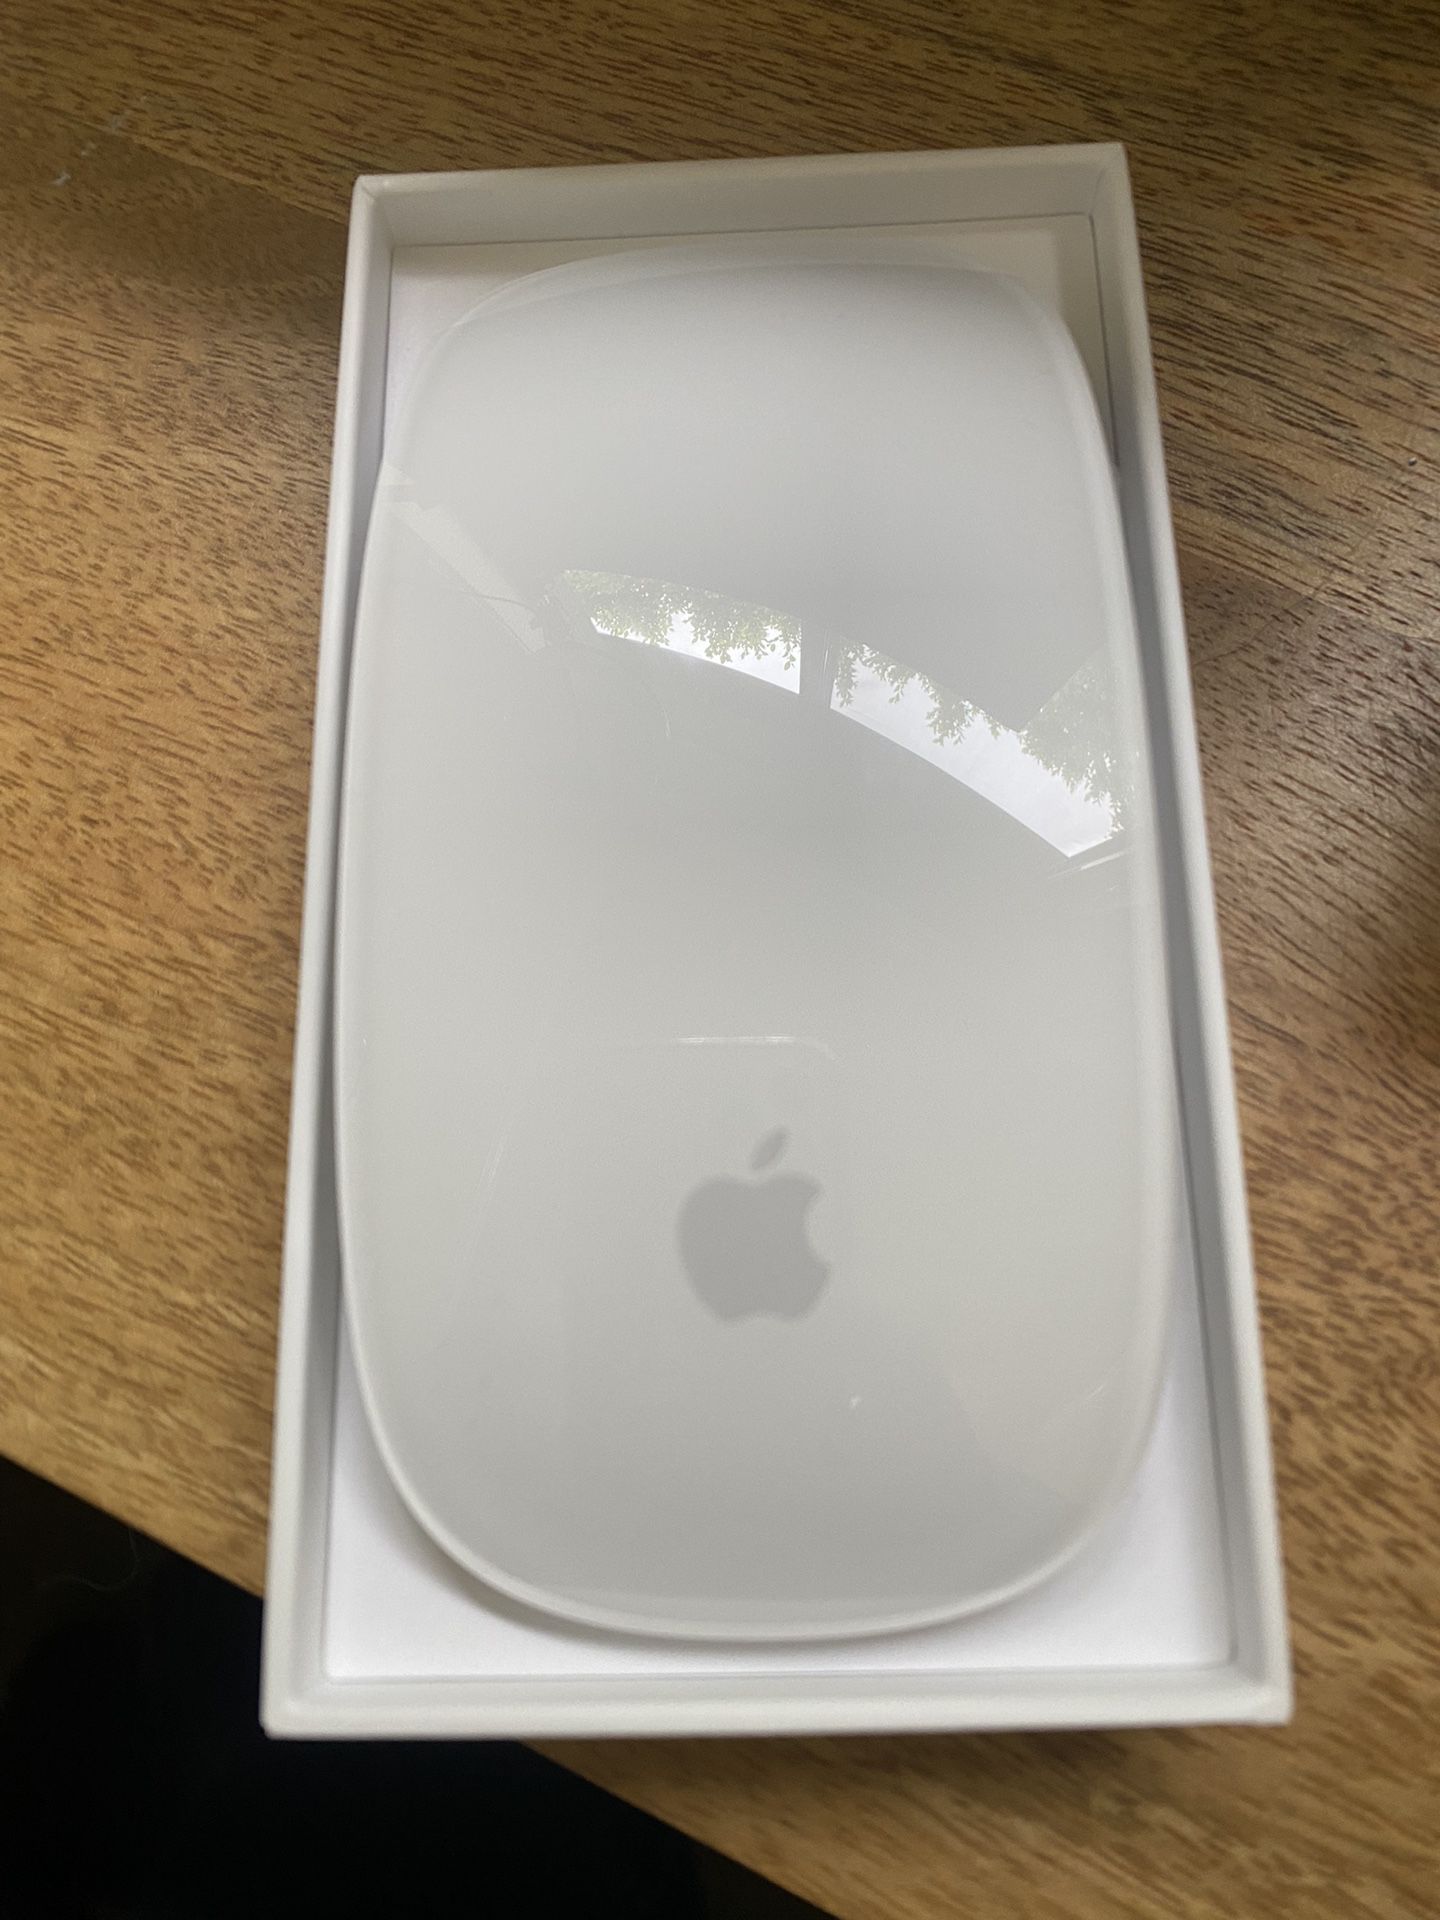 Apple Magic Mouse - Brand new